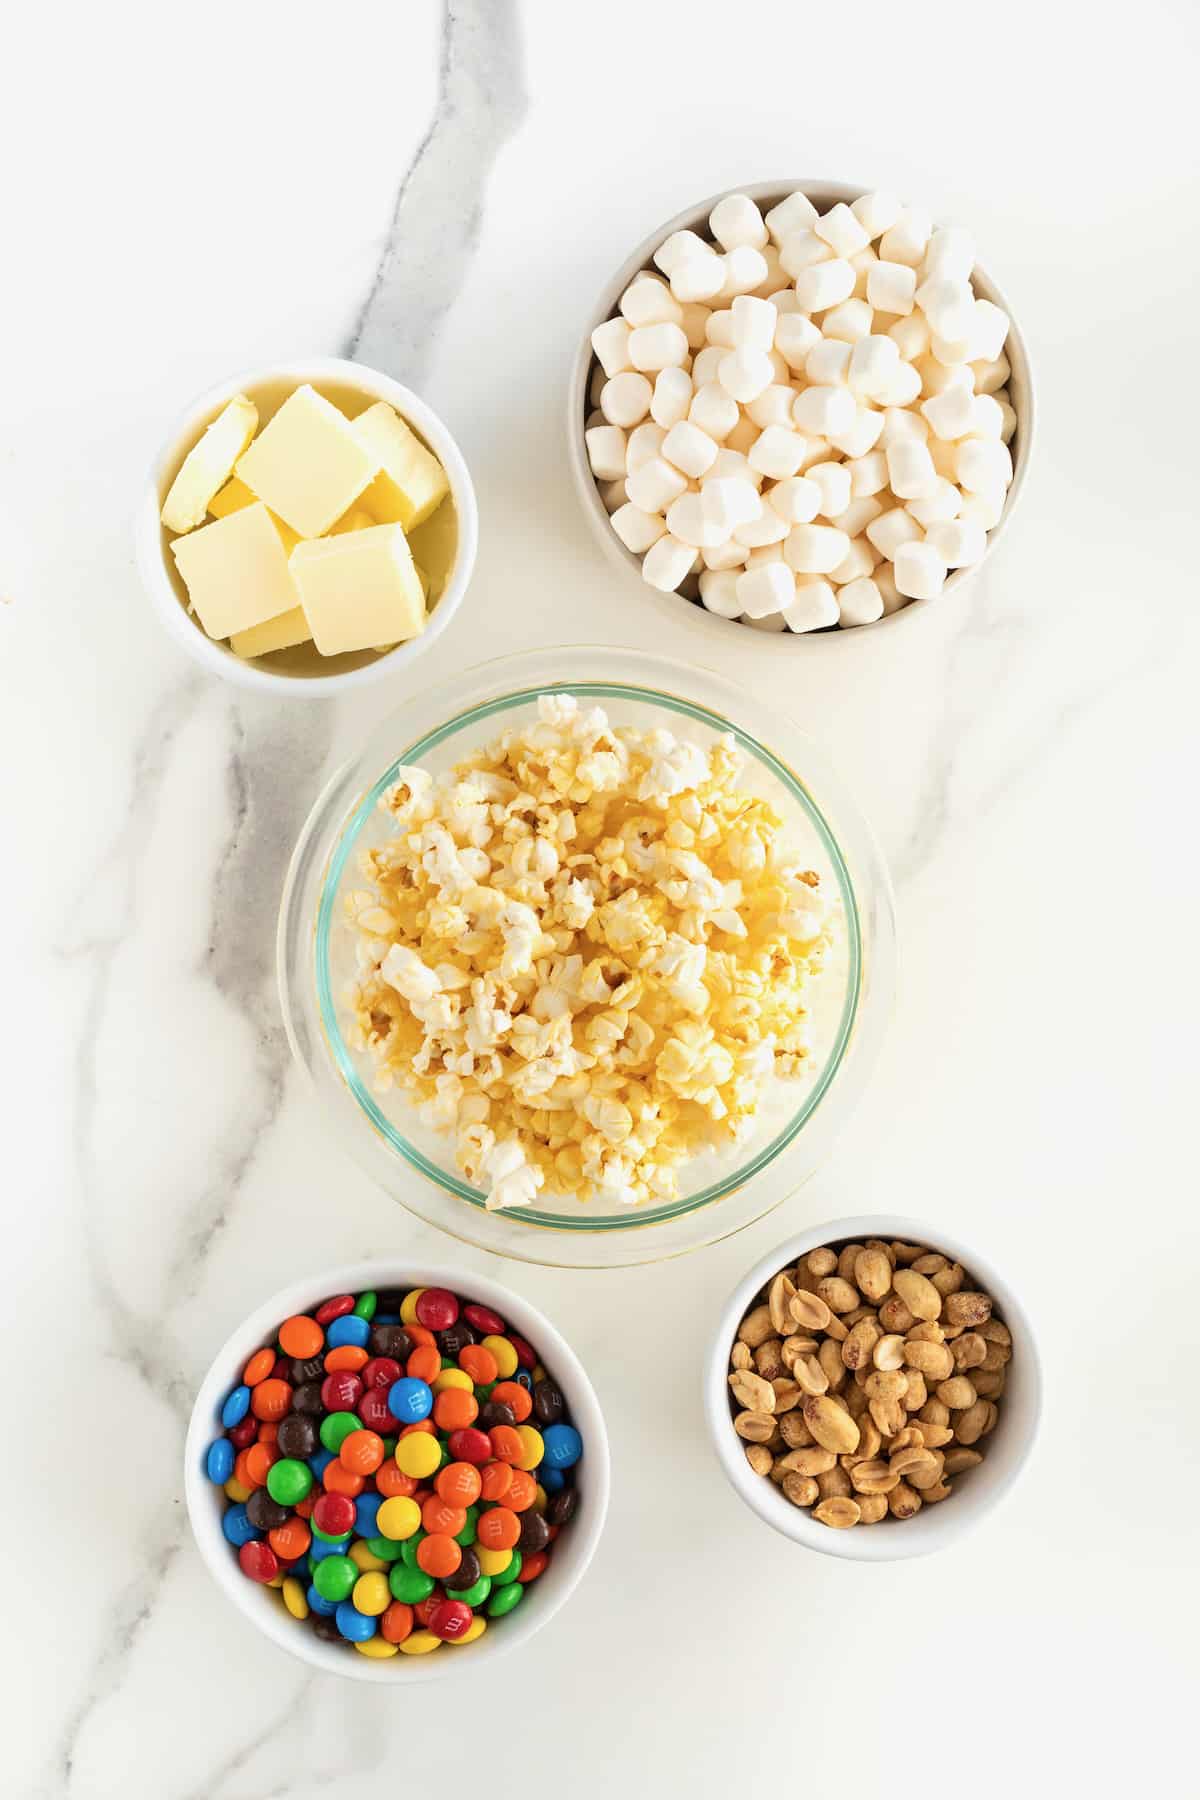 Ingredients for peanut popcorn cake in small glass dishes on a white marble counter.